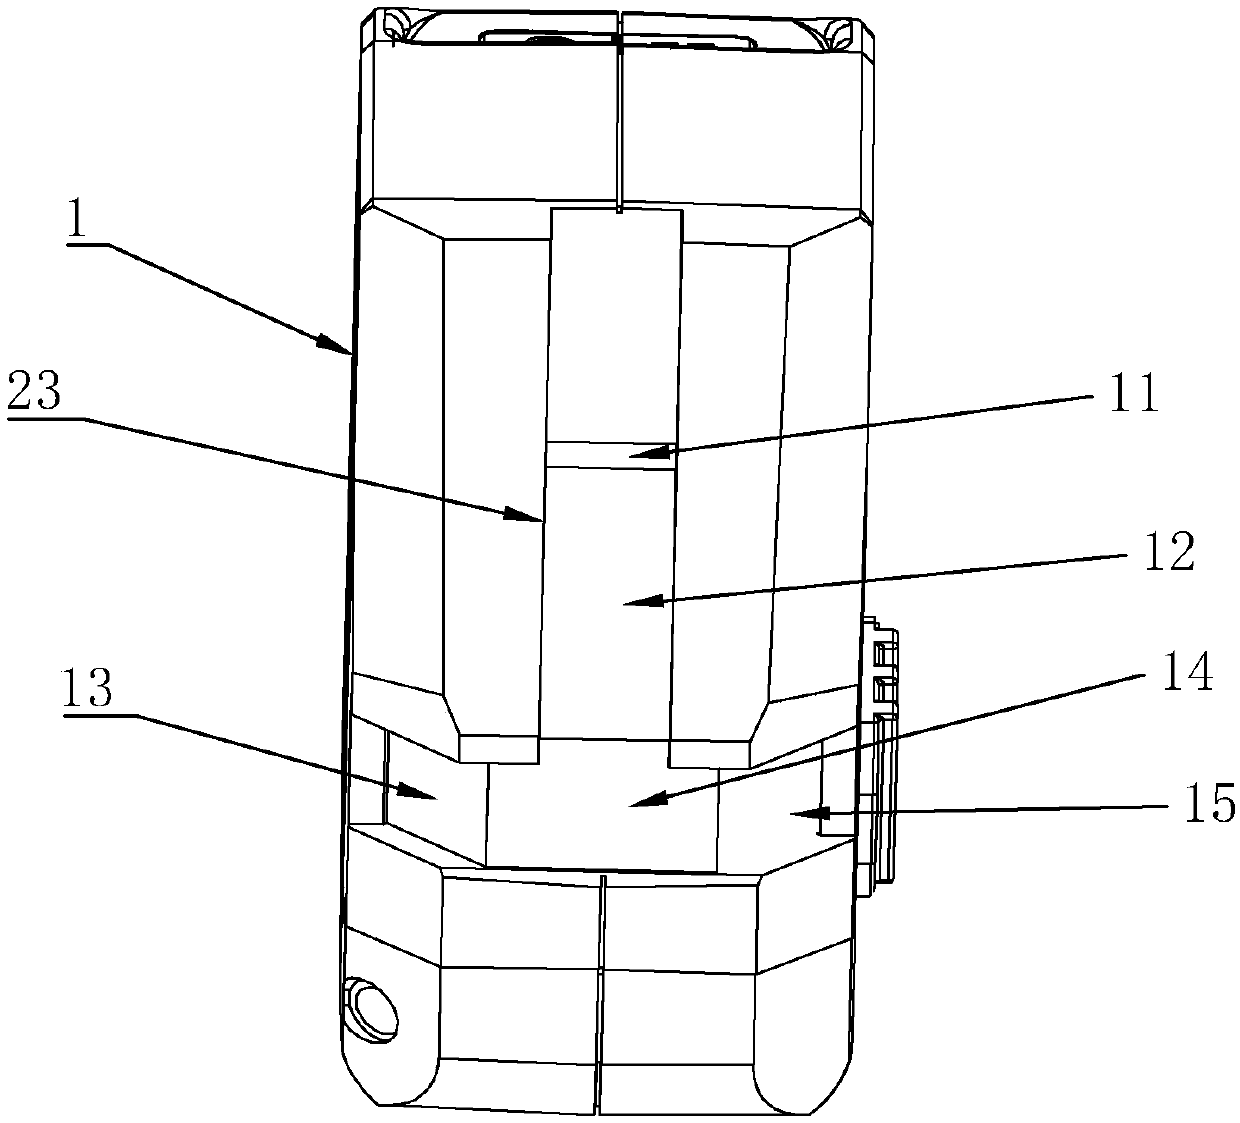 Cross-shaped projecting laser instrument